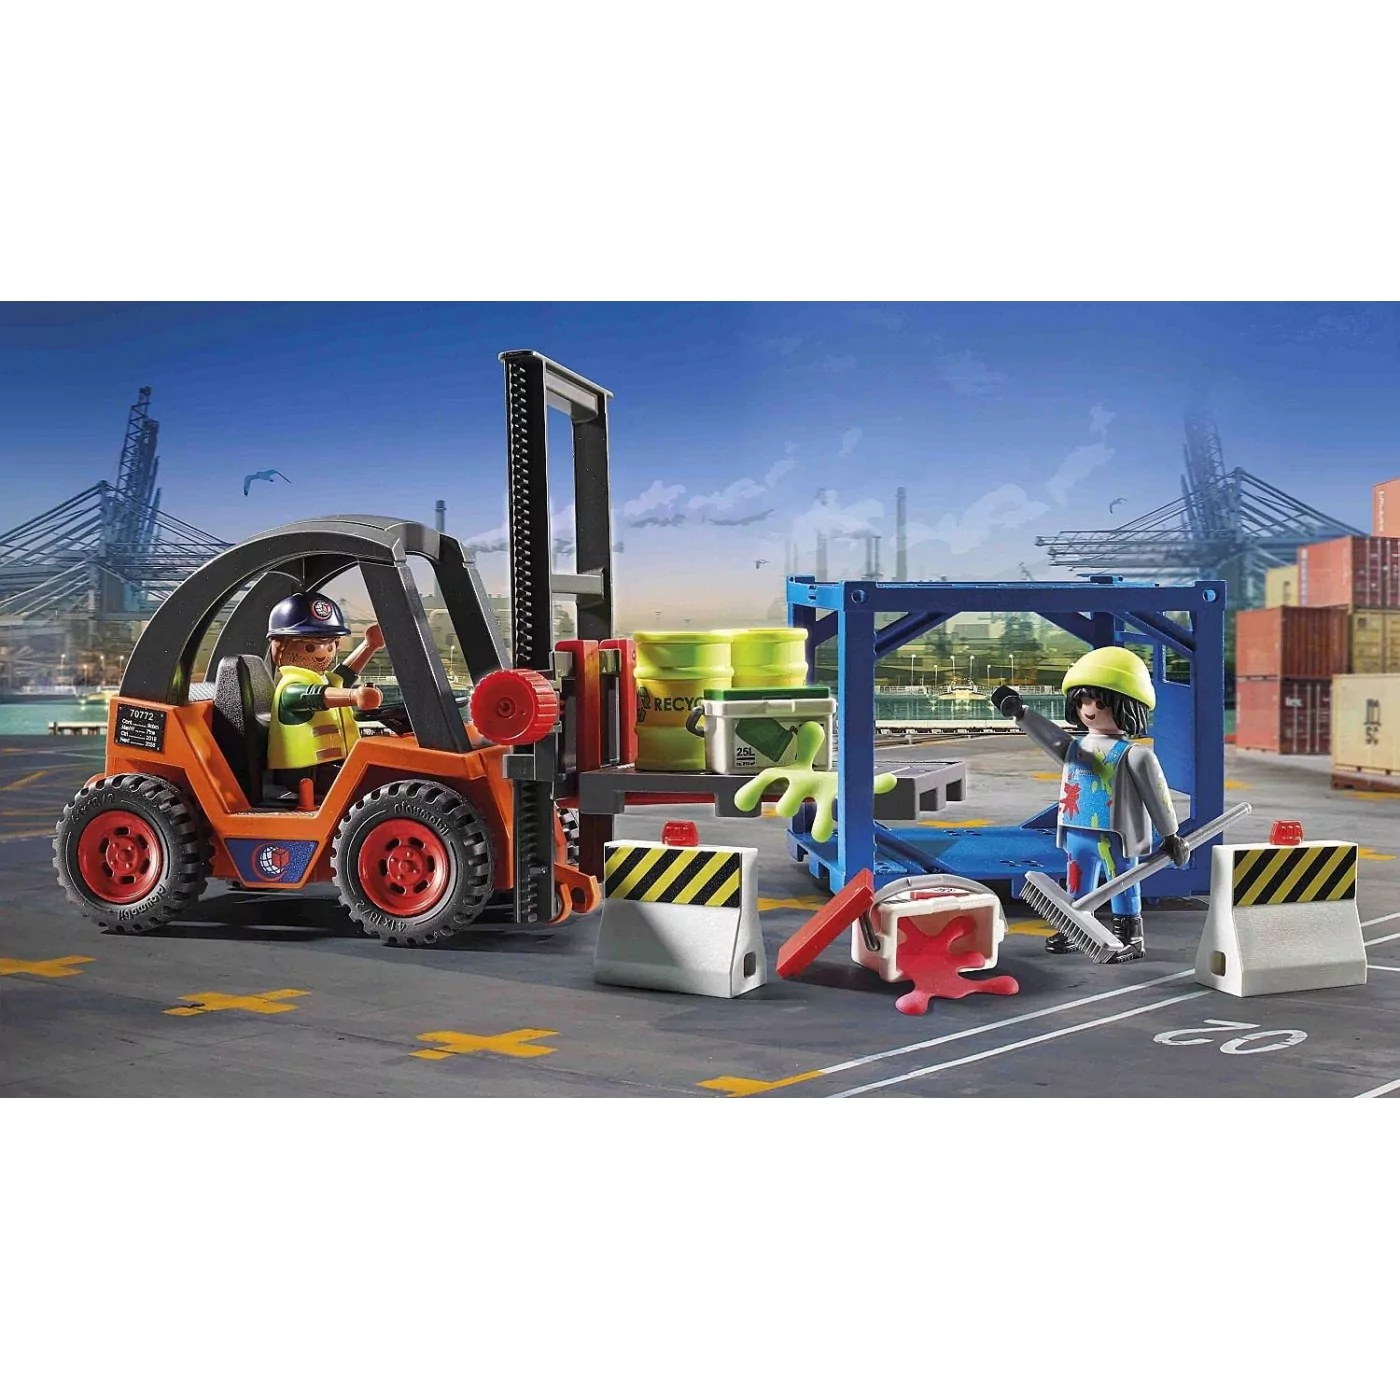 Playmobil City Action Forklift With Freight